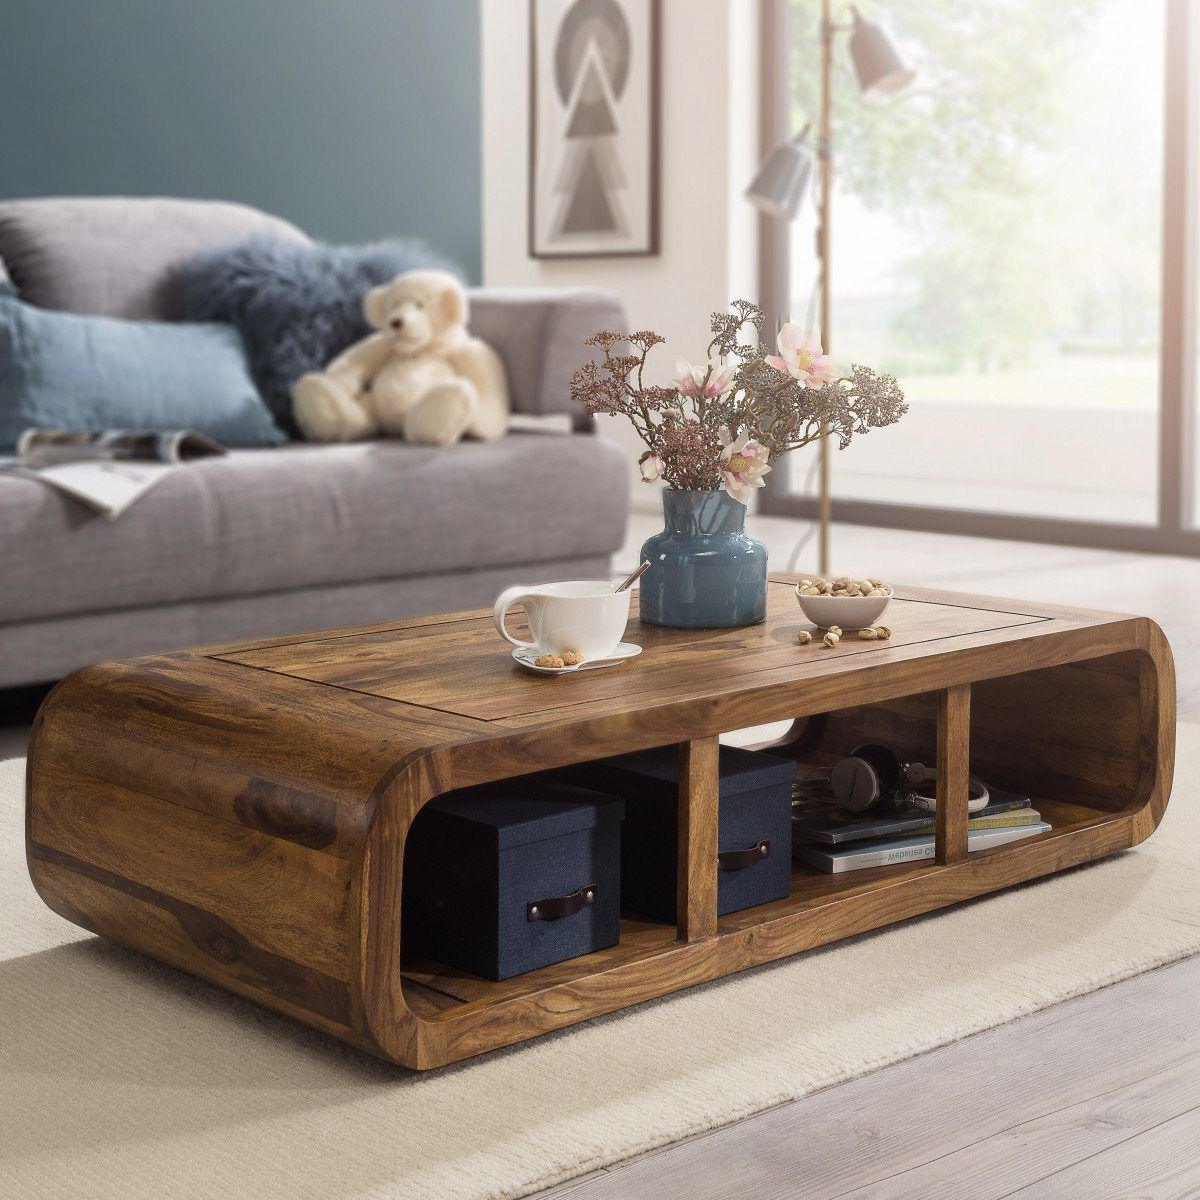 Buy Solid Wood Curved Coffee Table Online | New Launches Coffee Table Throughout Coffee Tables With Solid Legs (View 18 of 20)